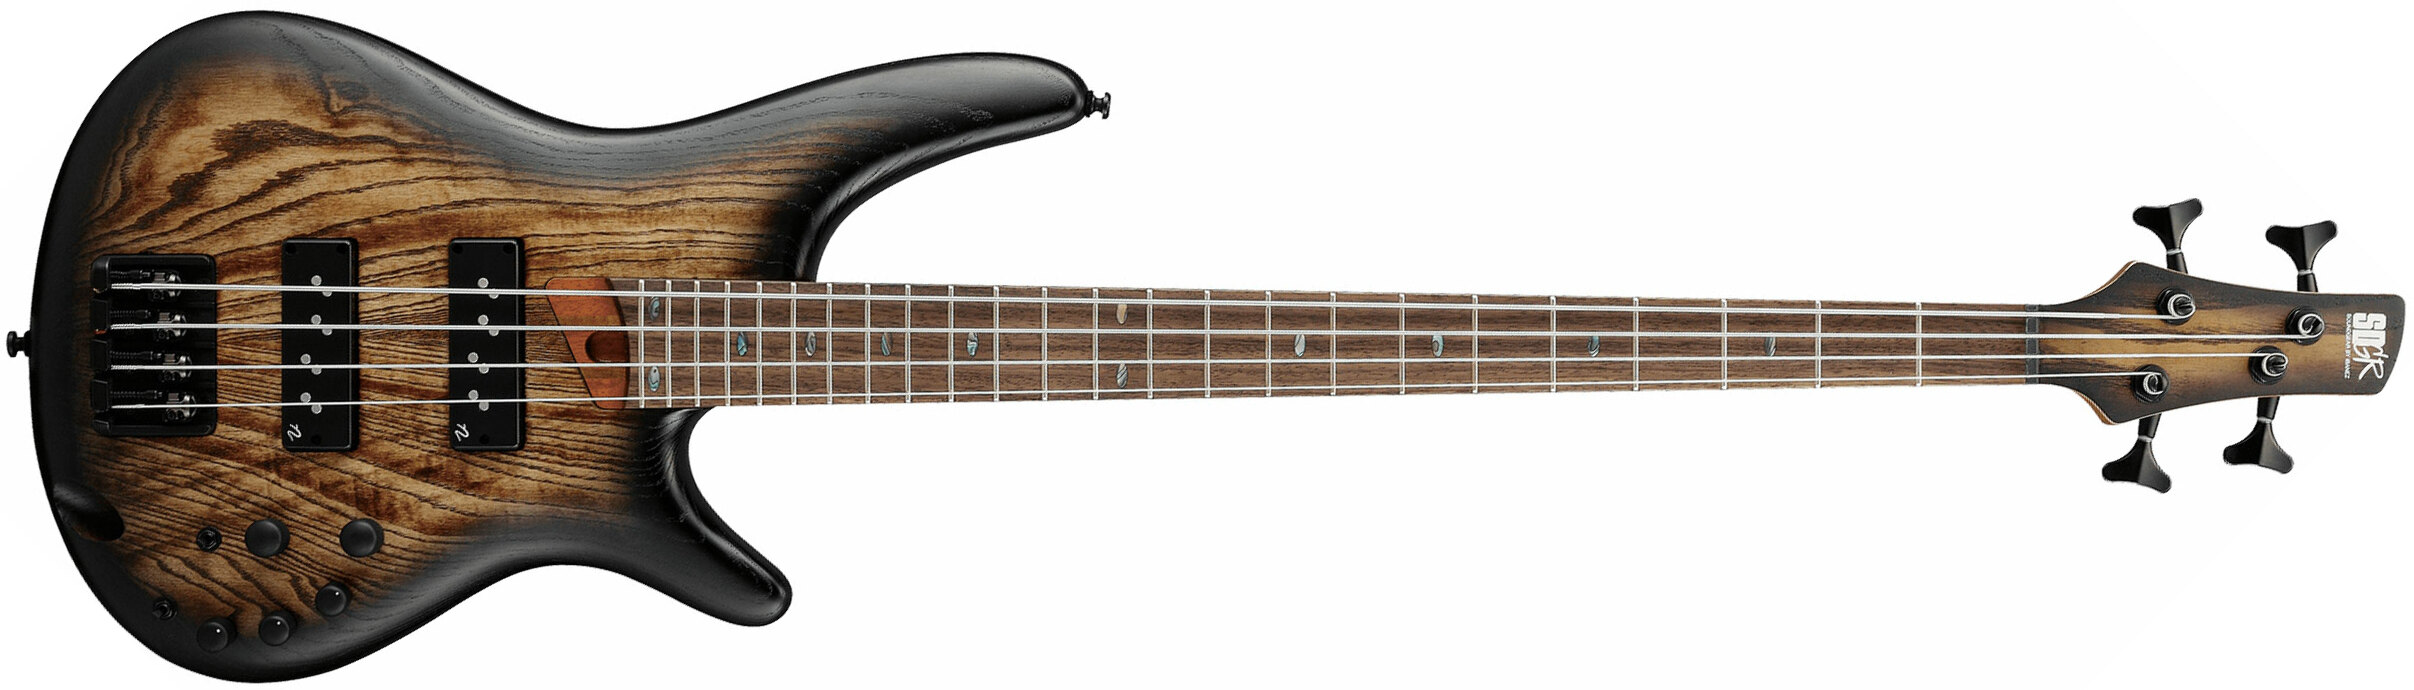 Ibanez Sr600e Ast Standard Active Rw - Antique Brown Stained Burst - Solid body electric bass - Main picture